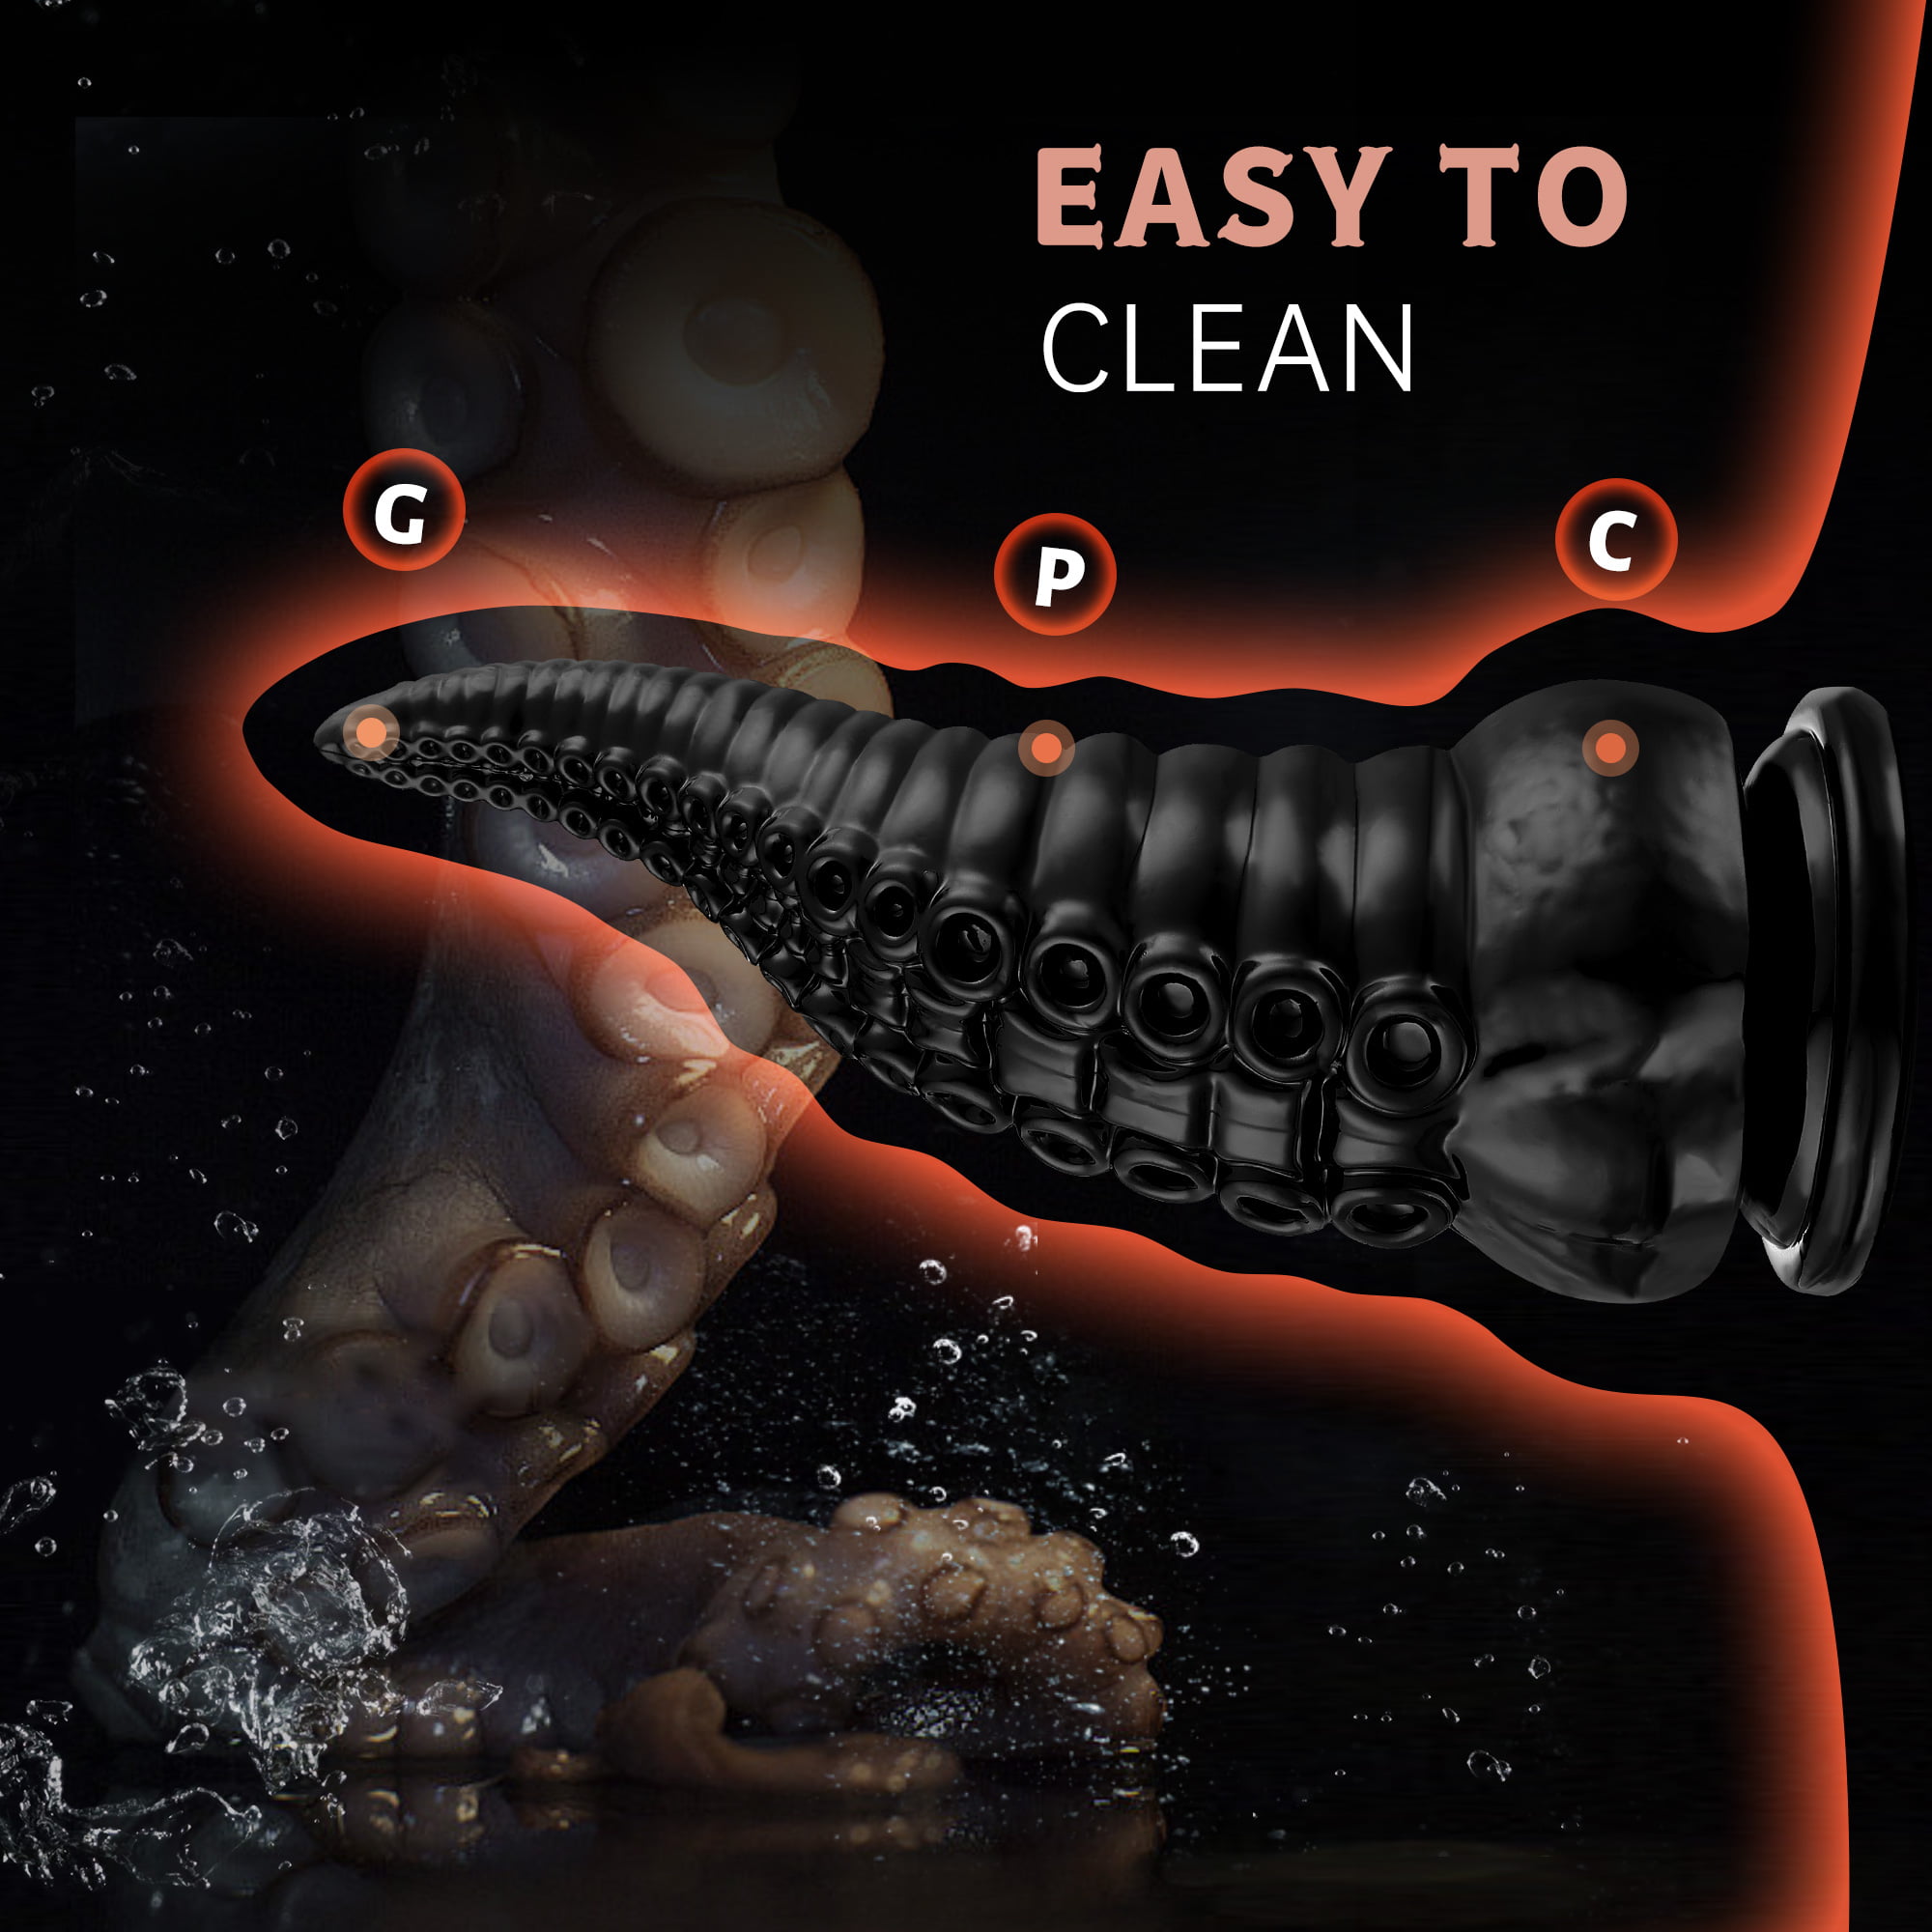 Jaffen Dildo 7.5 Inch Sex Toys Octopus Tentacle Adult Toy with Suction Cup, Hands-free Play G Spot Stimulator for Women and Men Anal Play, Black picture picture